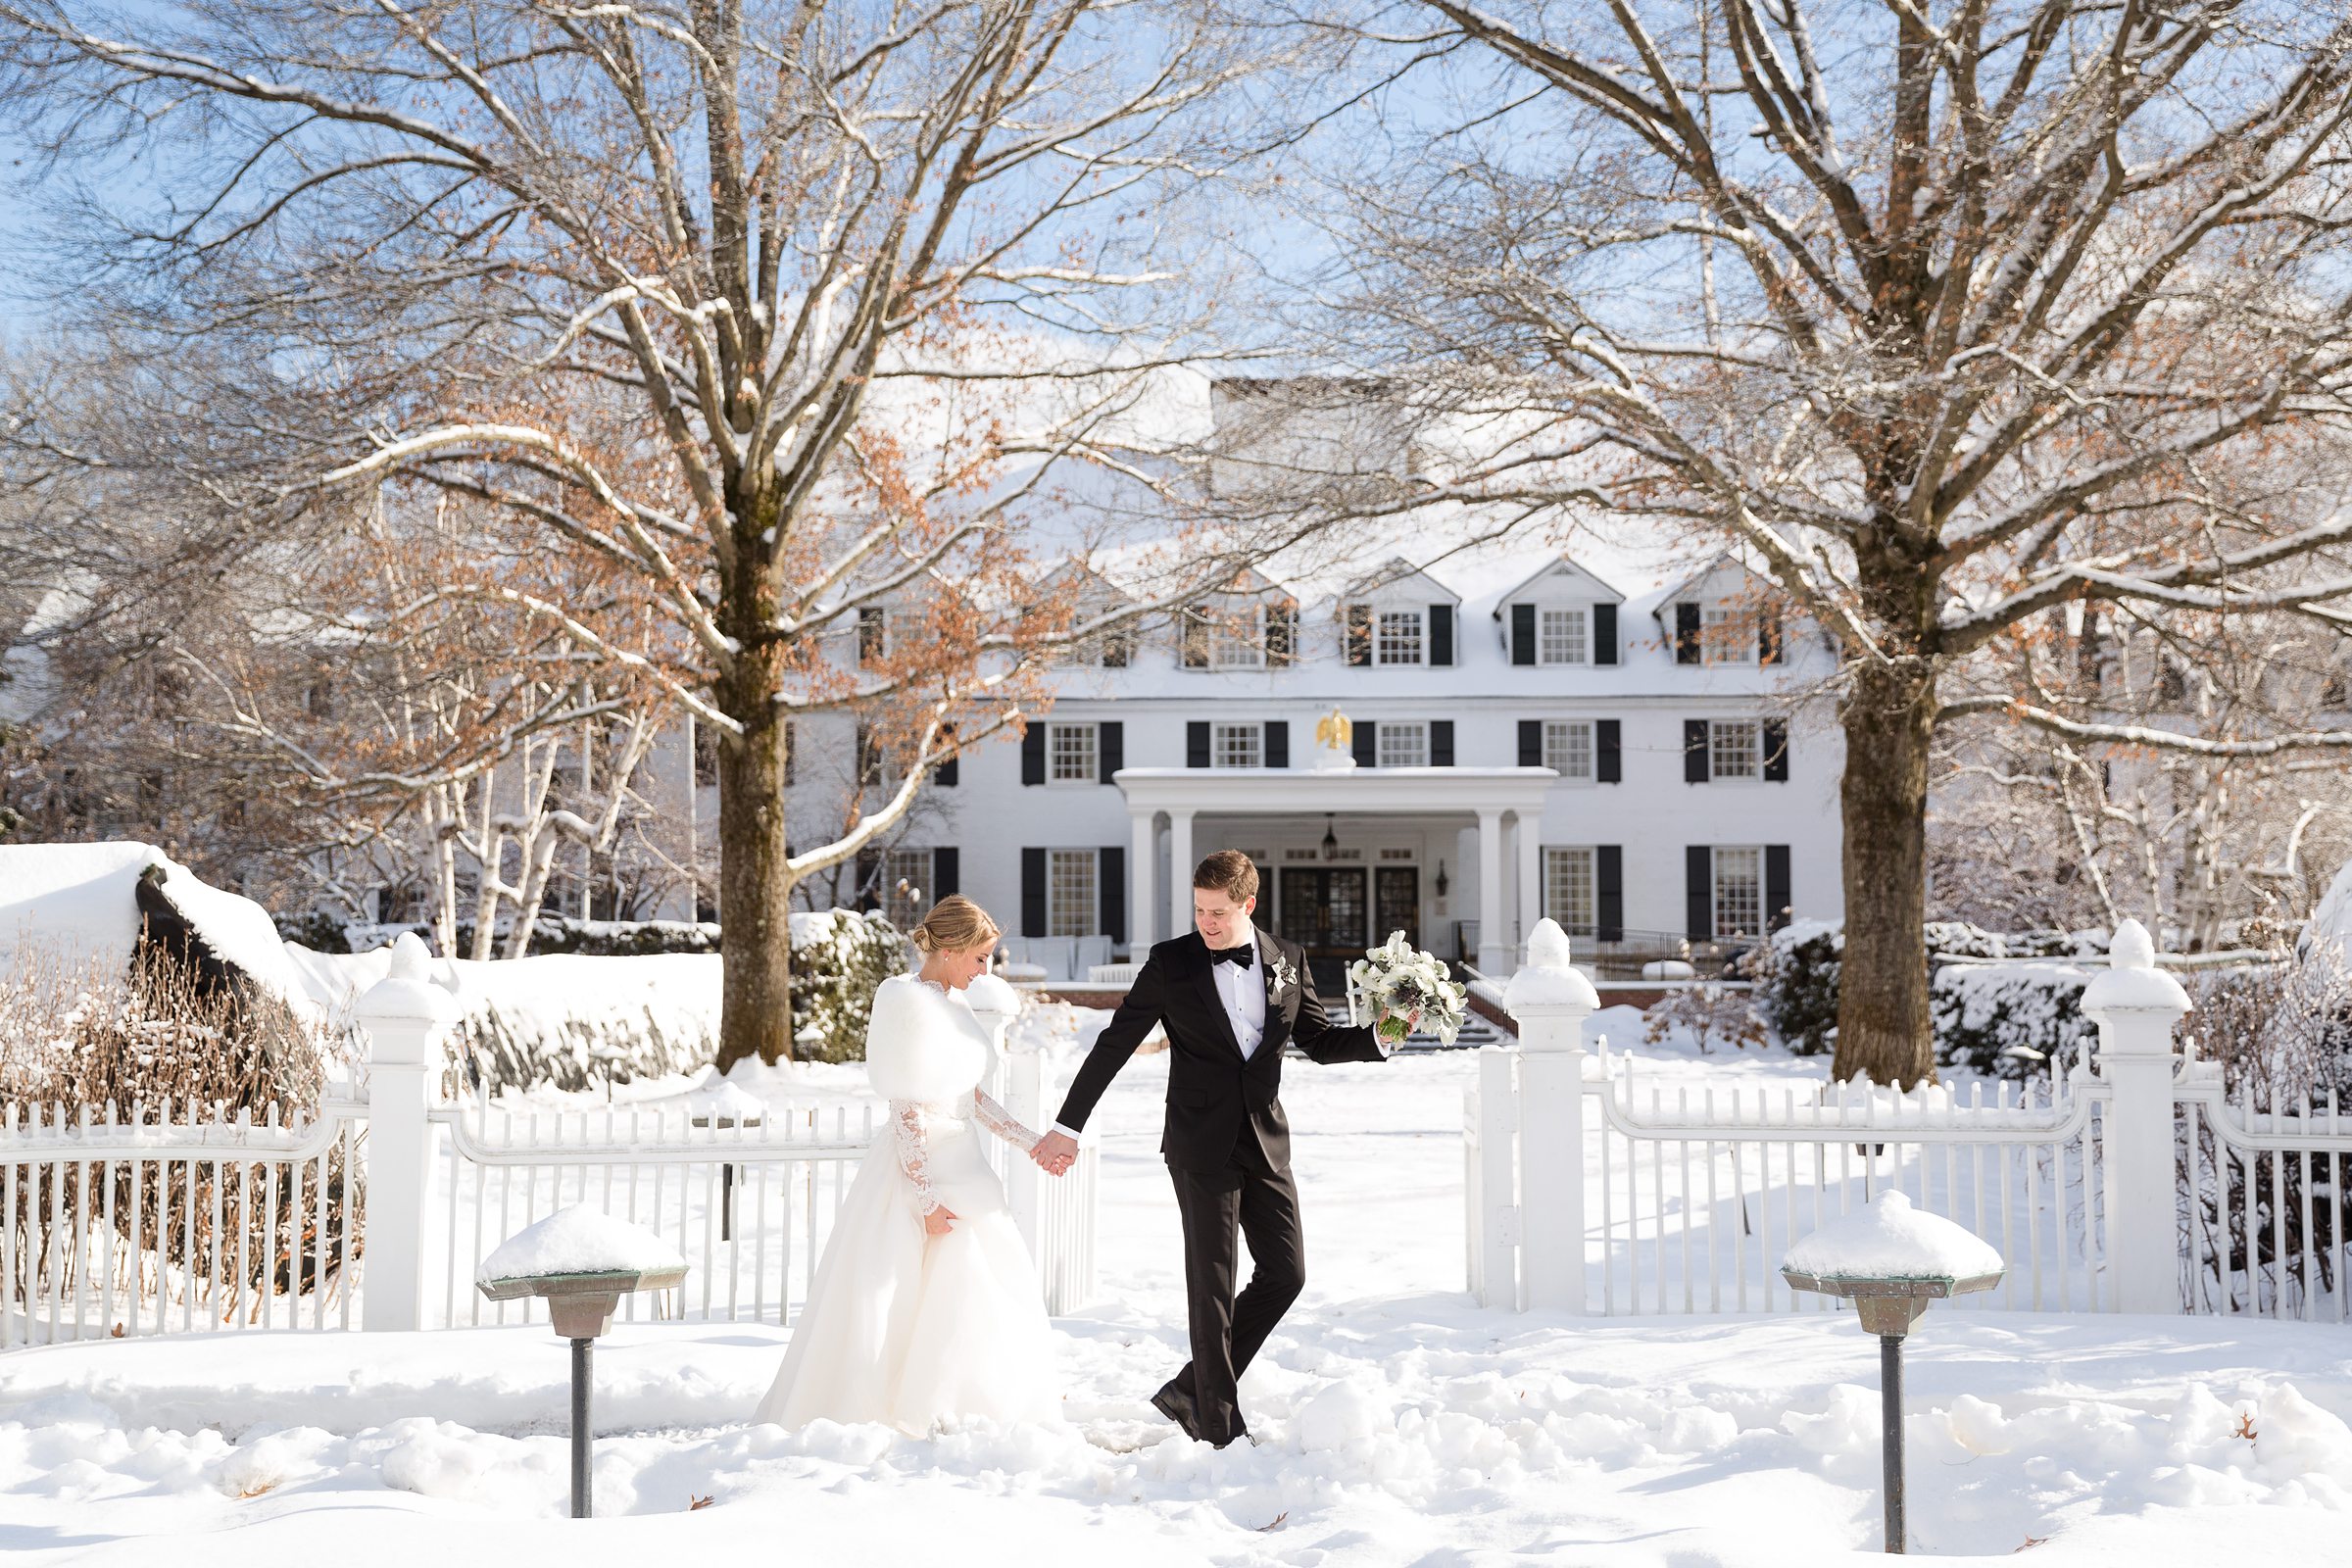 Bride and groom walking hand in hand at winter wedding at the Woodstock Inn